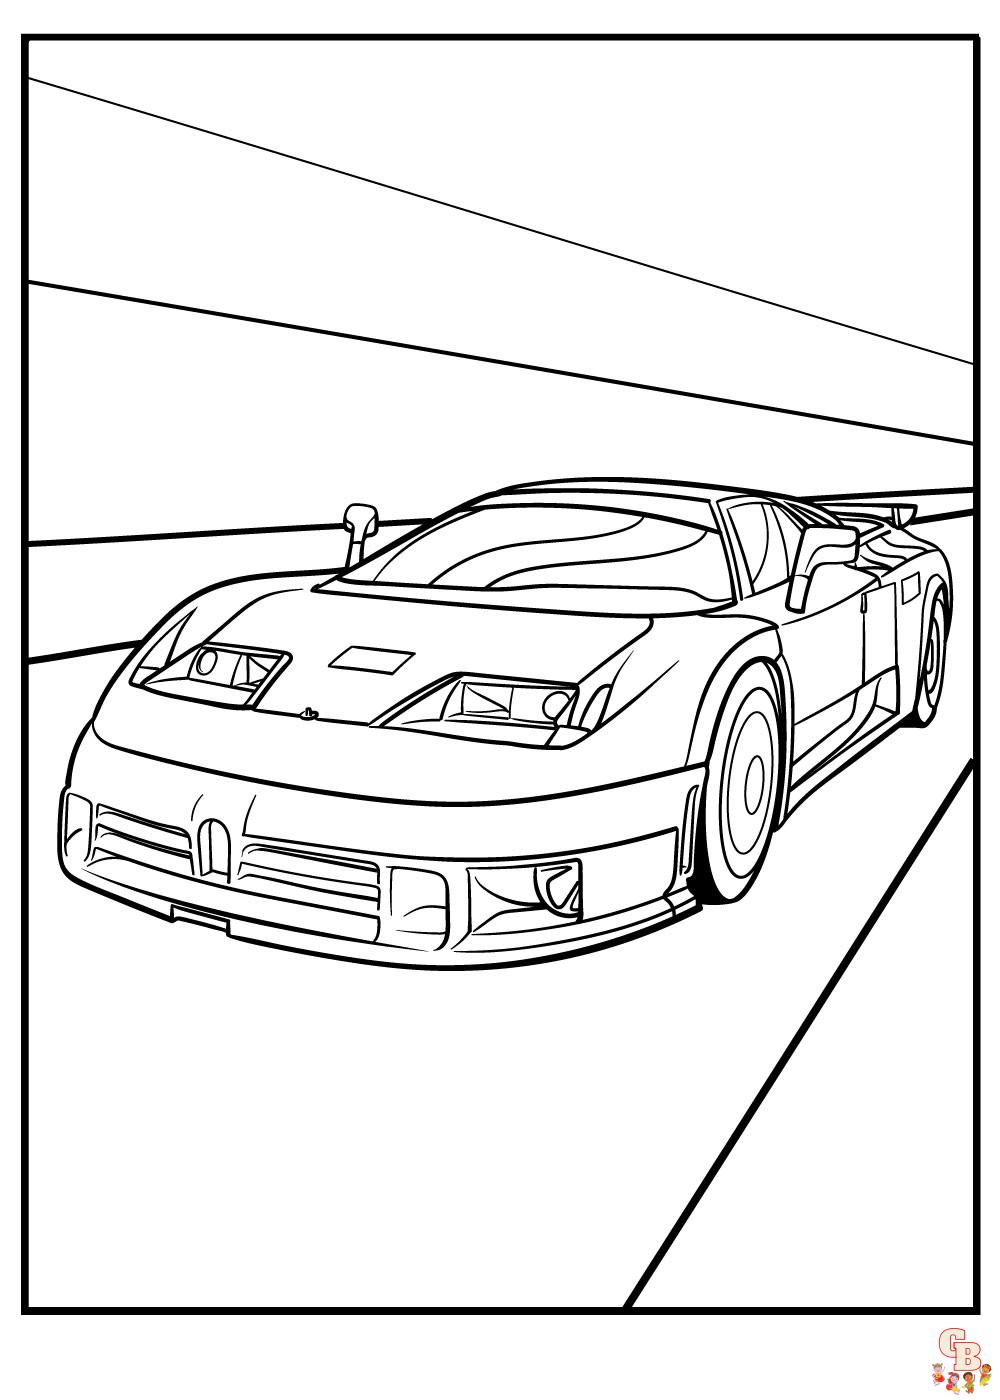 Supercars Coloring Pages 5